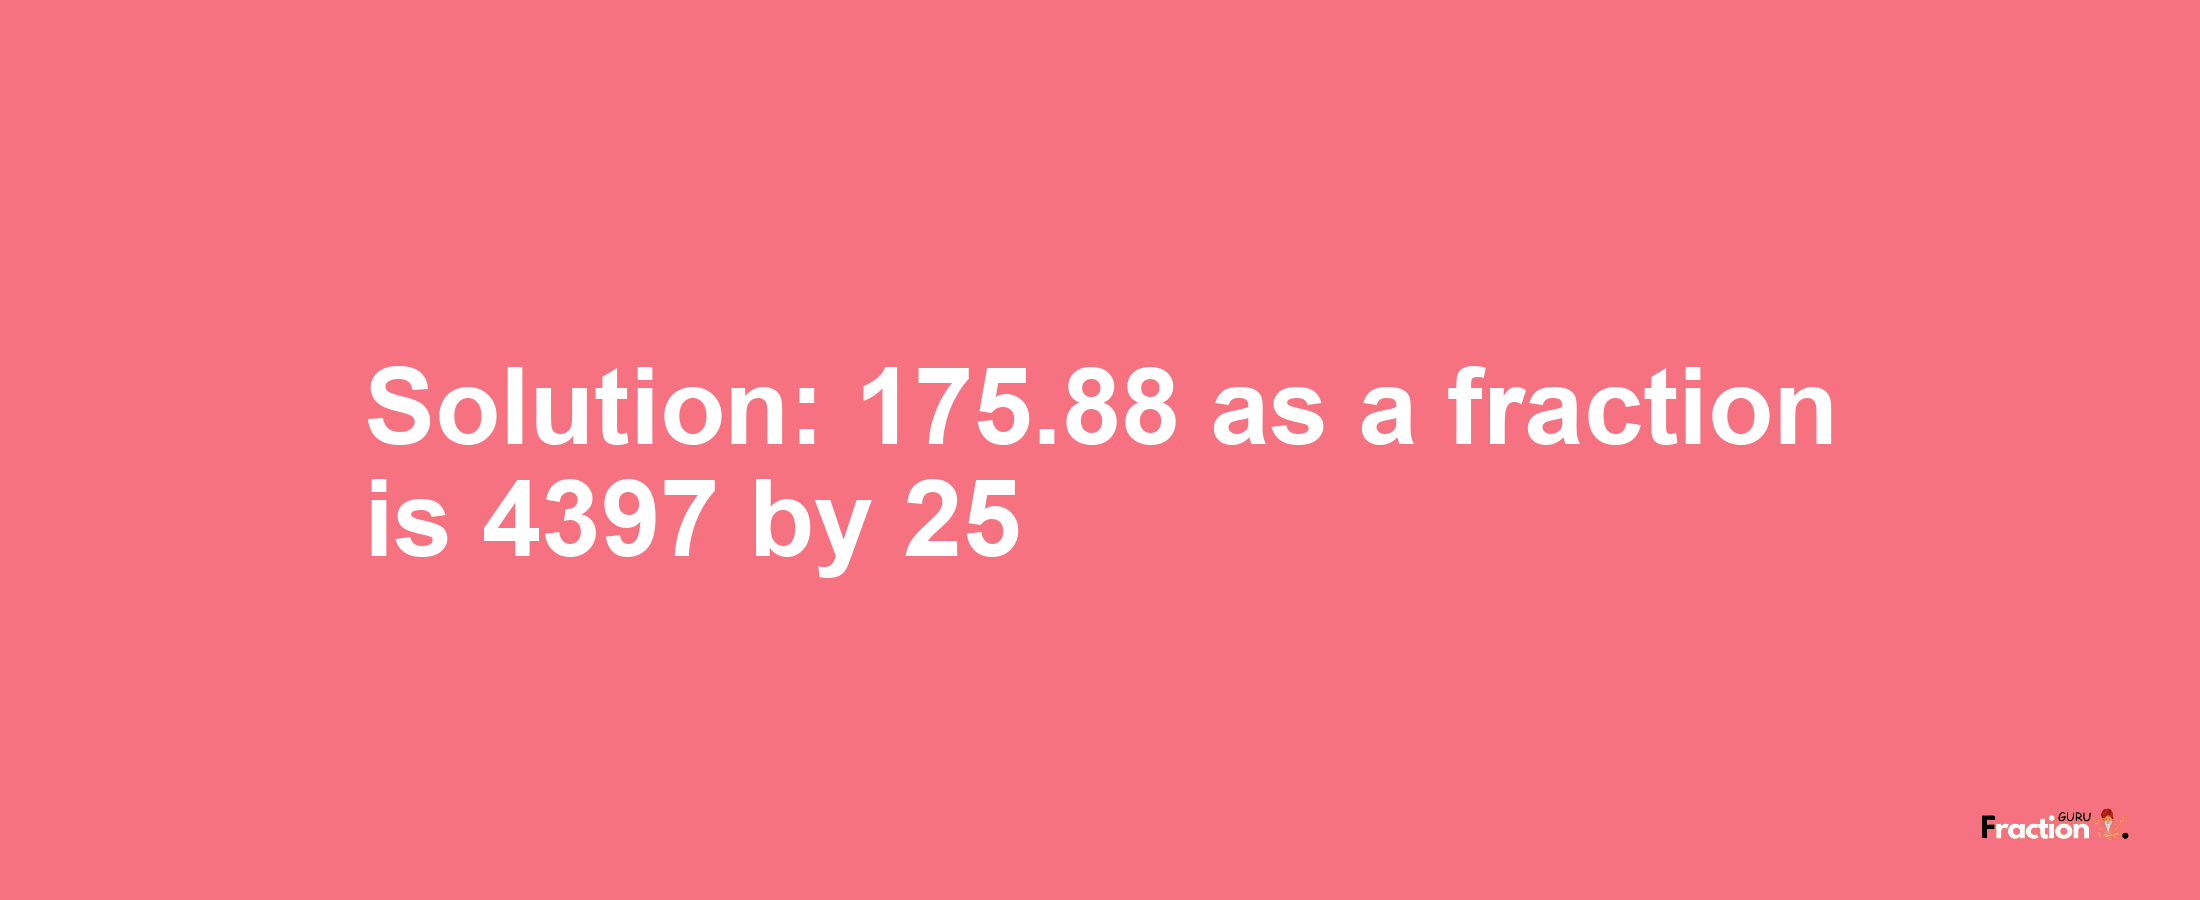 Solution:175.88 as a fraction is 4397/25